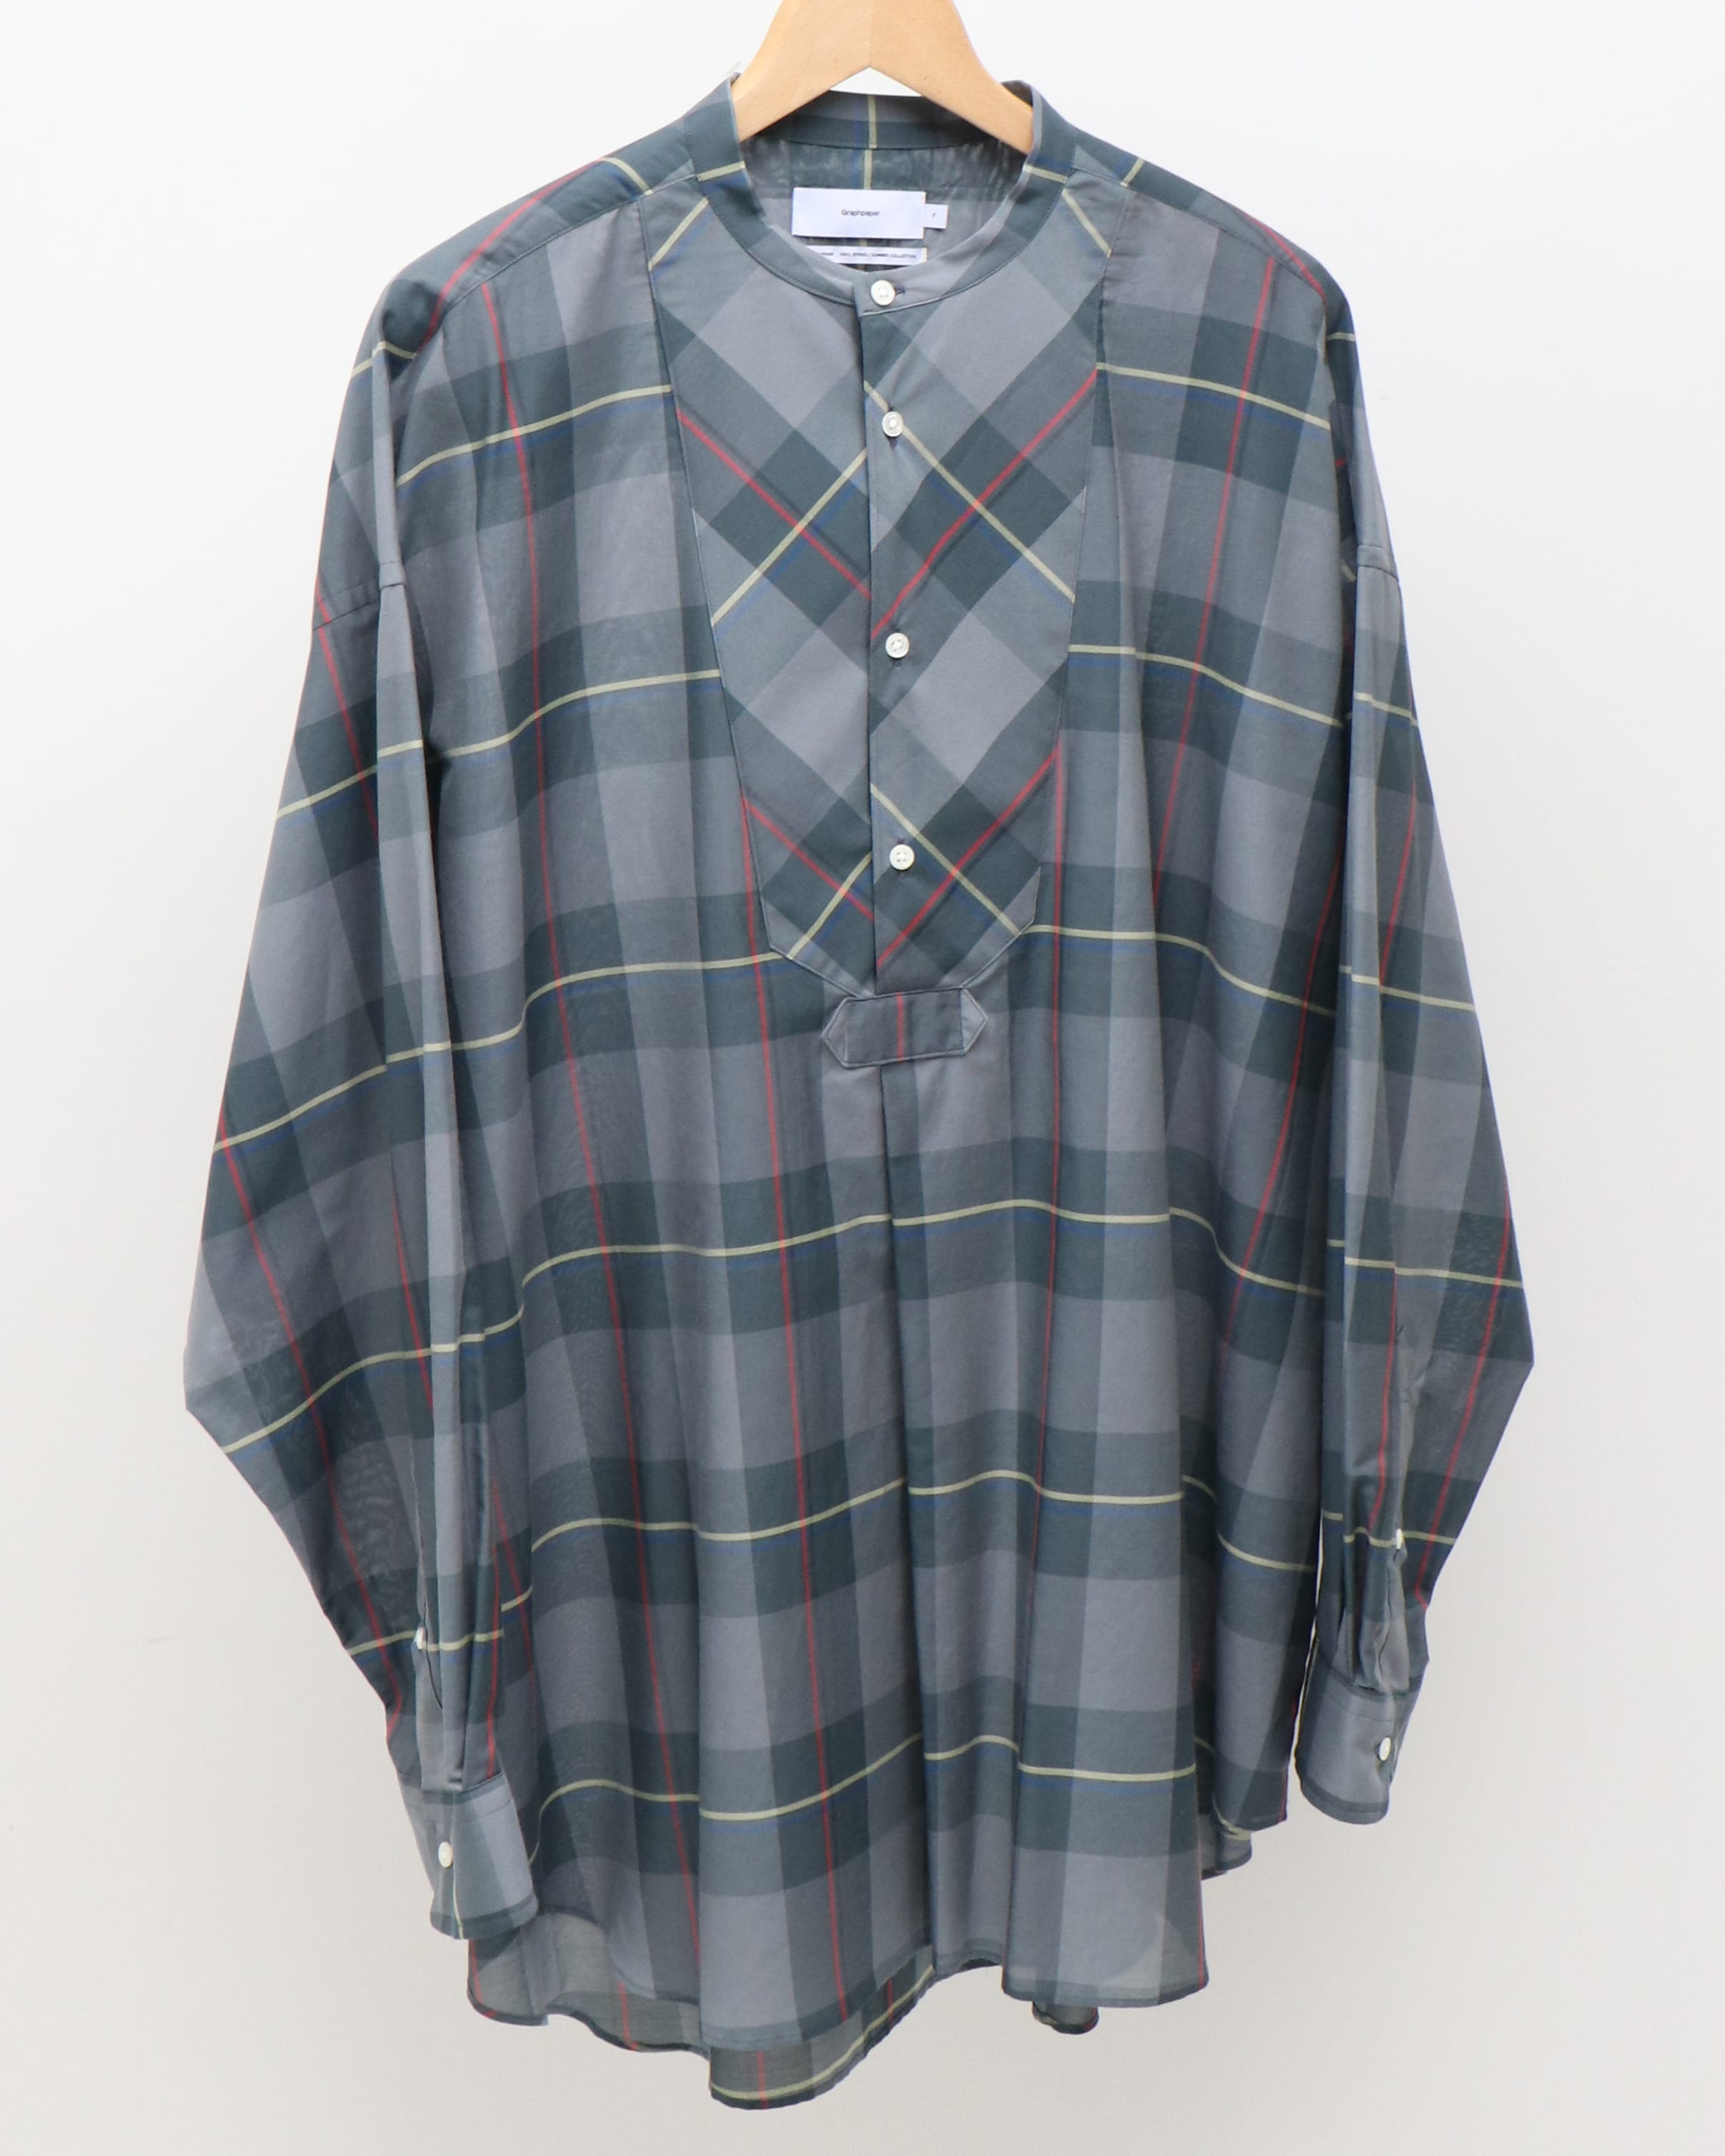 Sheer Check Oversized Band Collar Bosom Shirt CHECK – TIME AFTER TIME